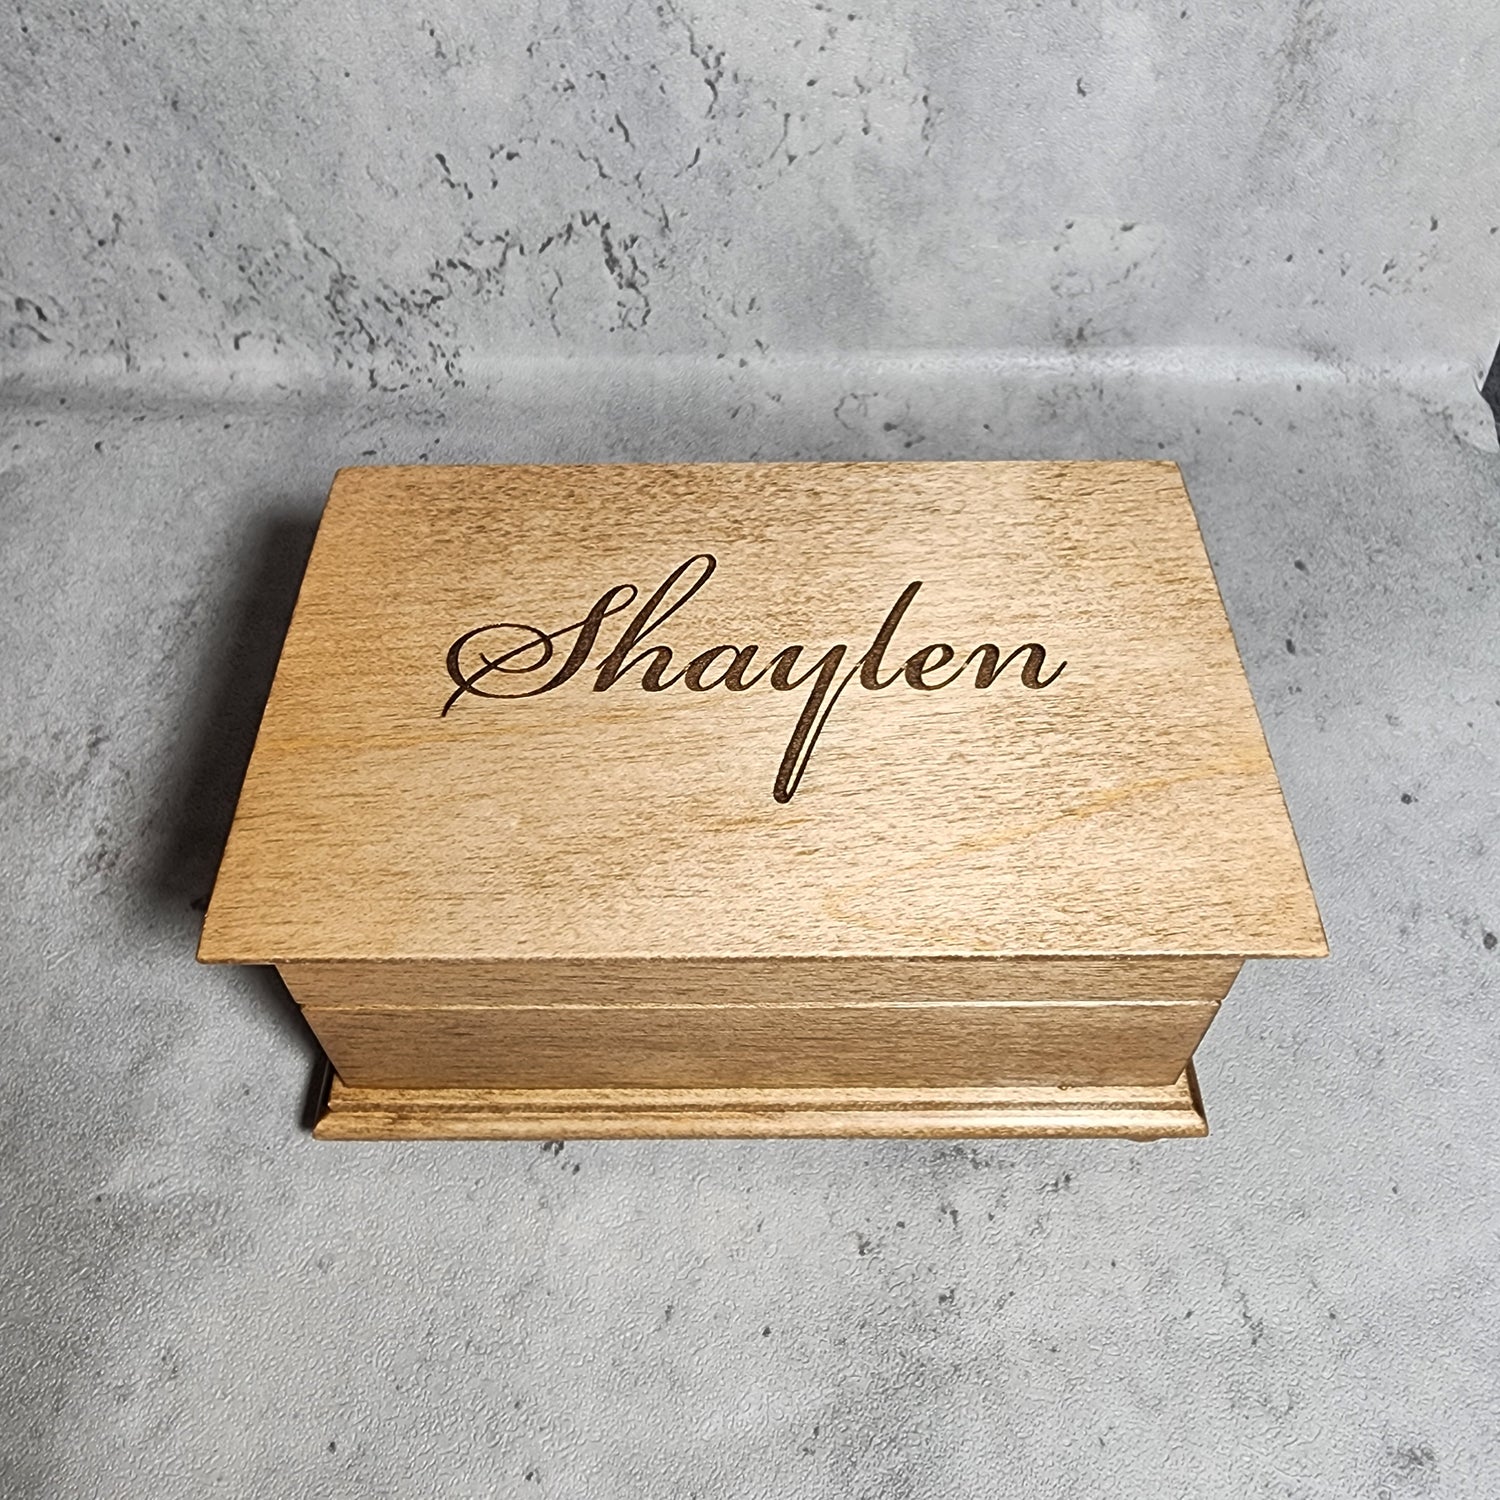 wooden jewelry box with name engraved on top, choose color, add song